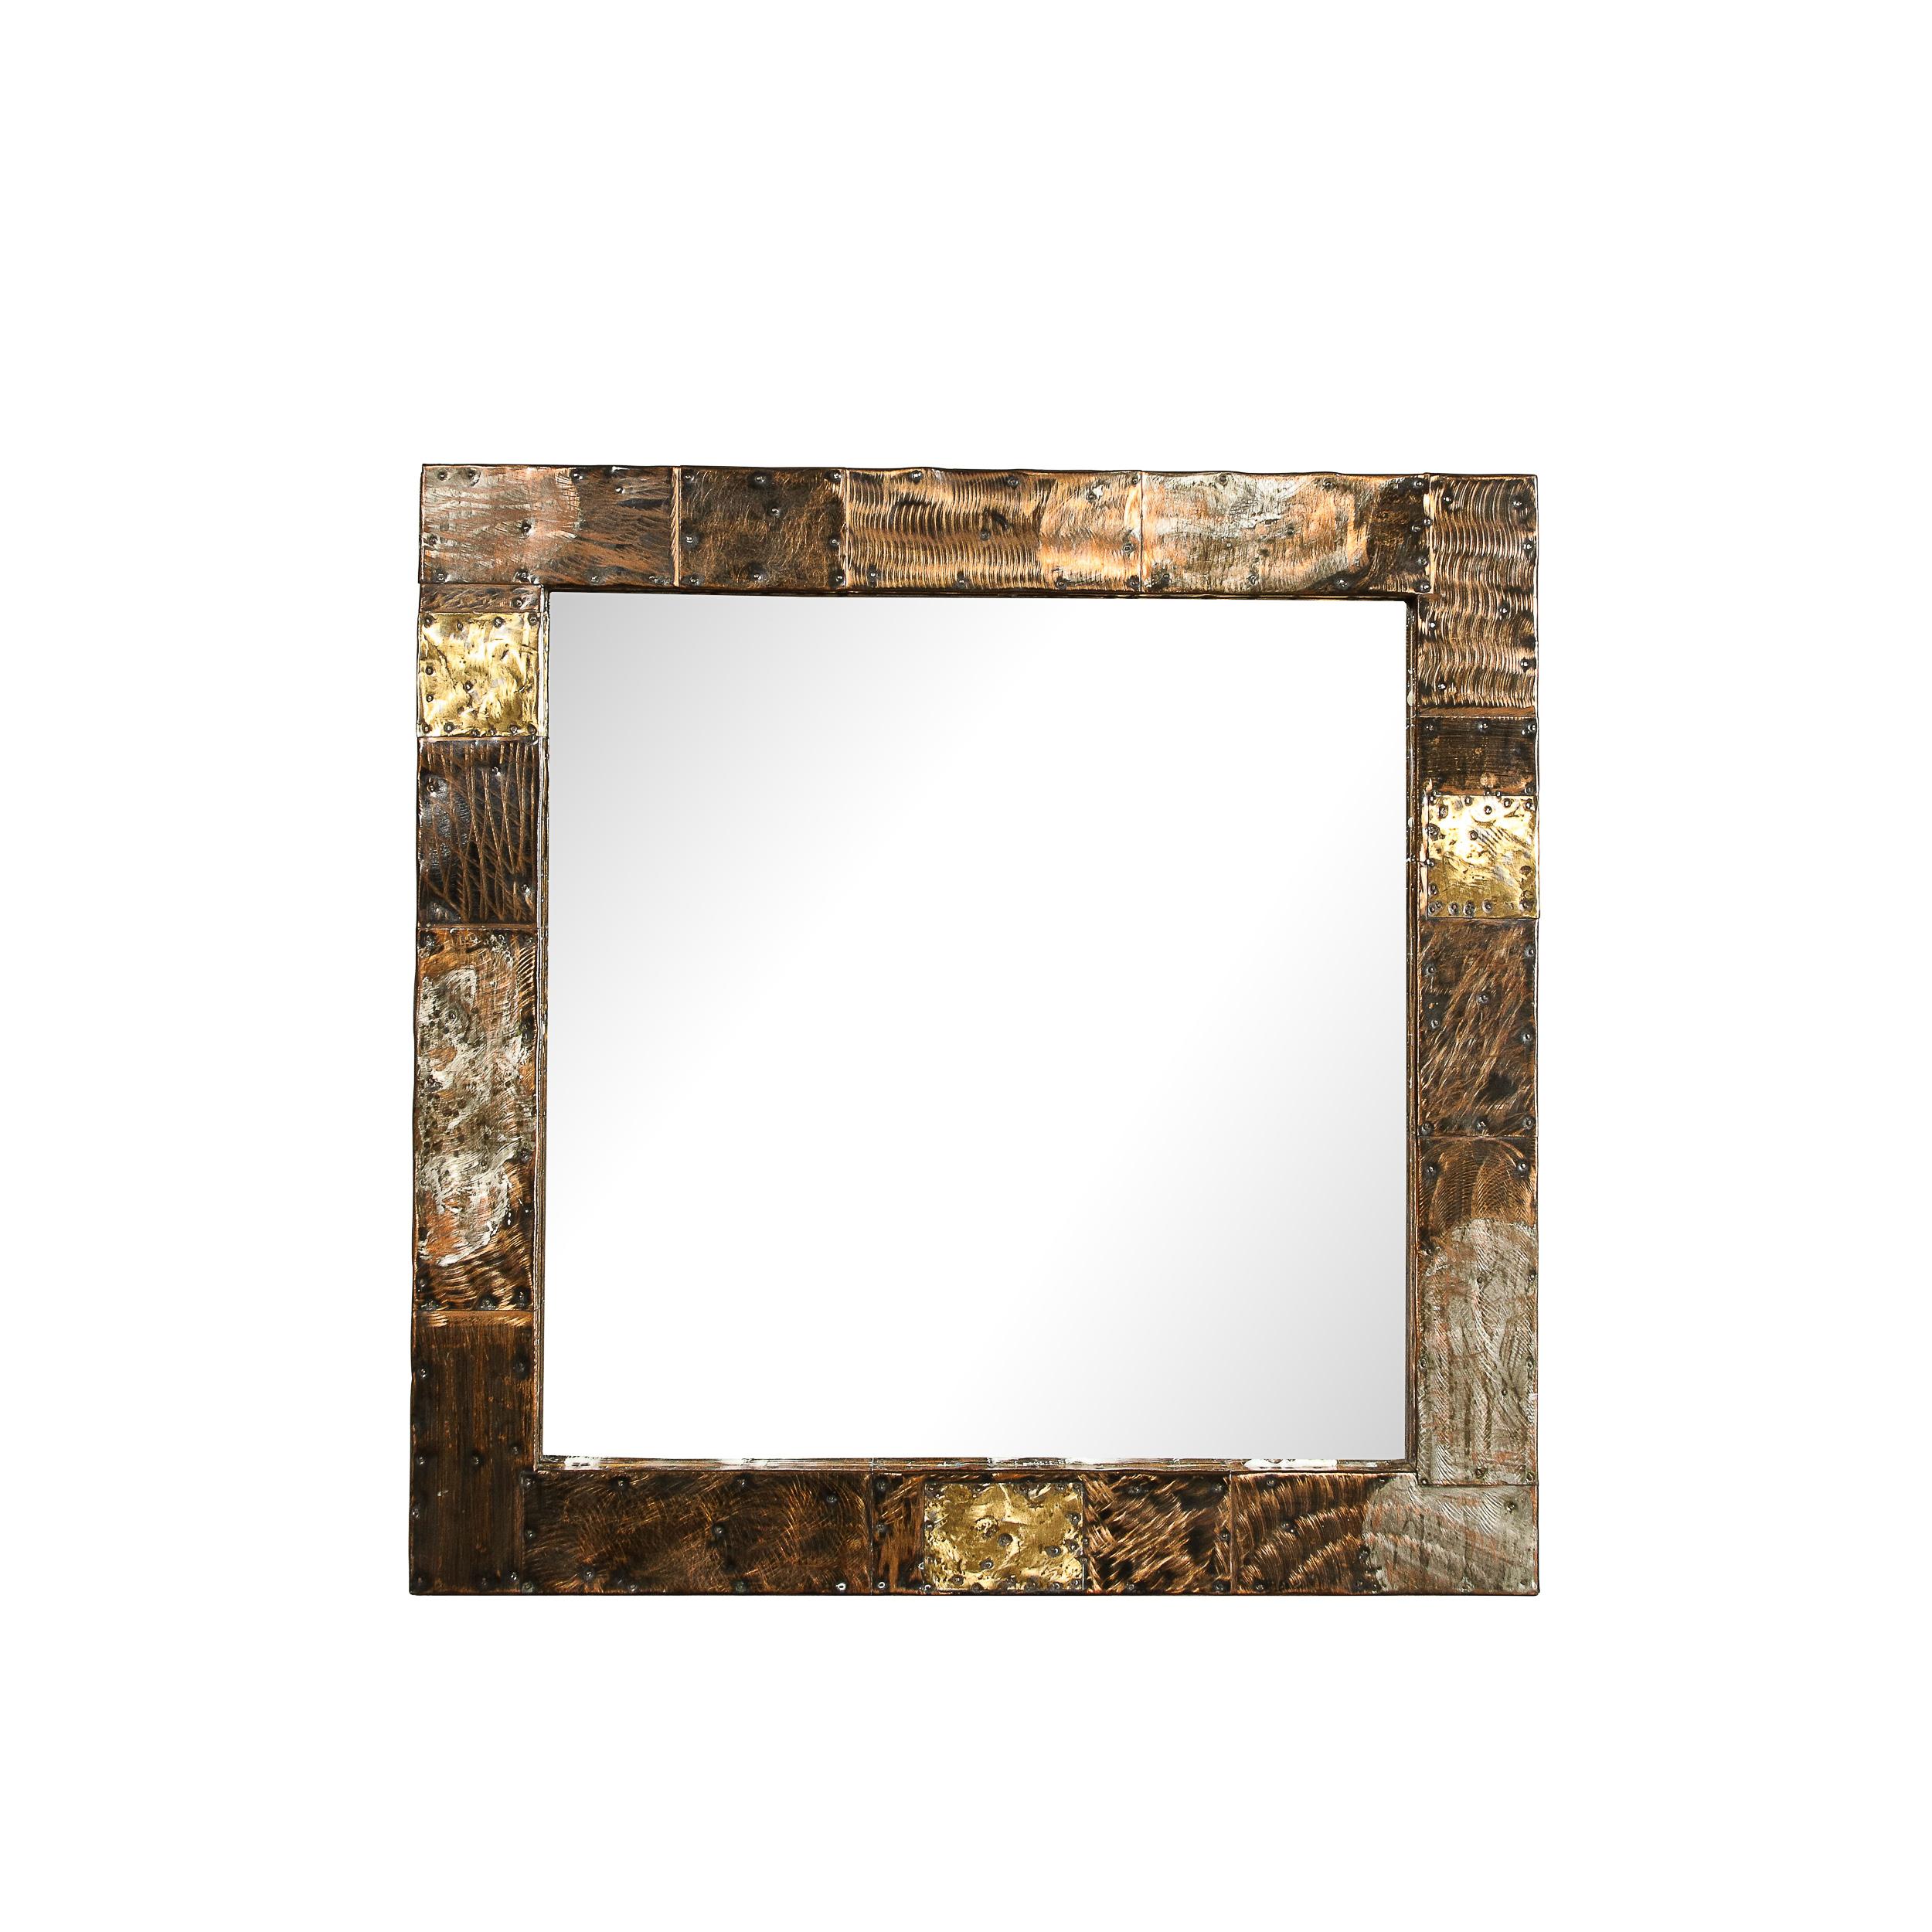 This striking and rare Mid-Century Brutalist Patchwork Mirror & Console was made by Paul Evans and originates from the United States Circa 1970. Featuring a bold and beautifully crafted square frame in the Patchwork technique Evans has explored